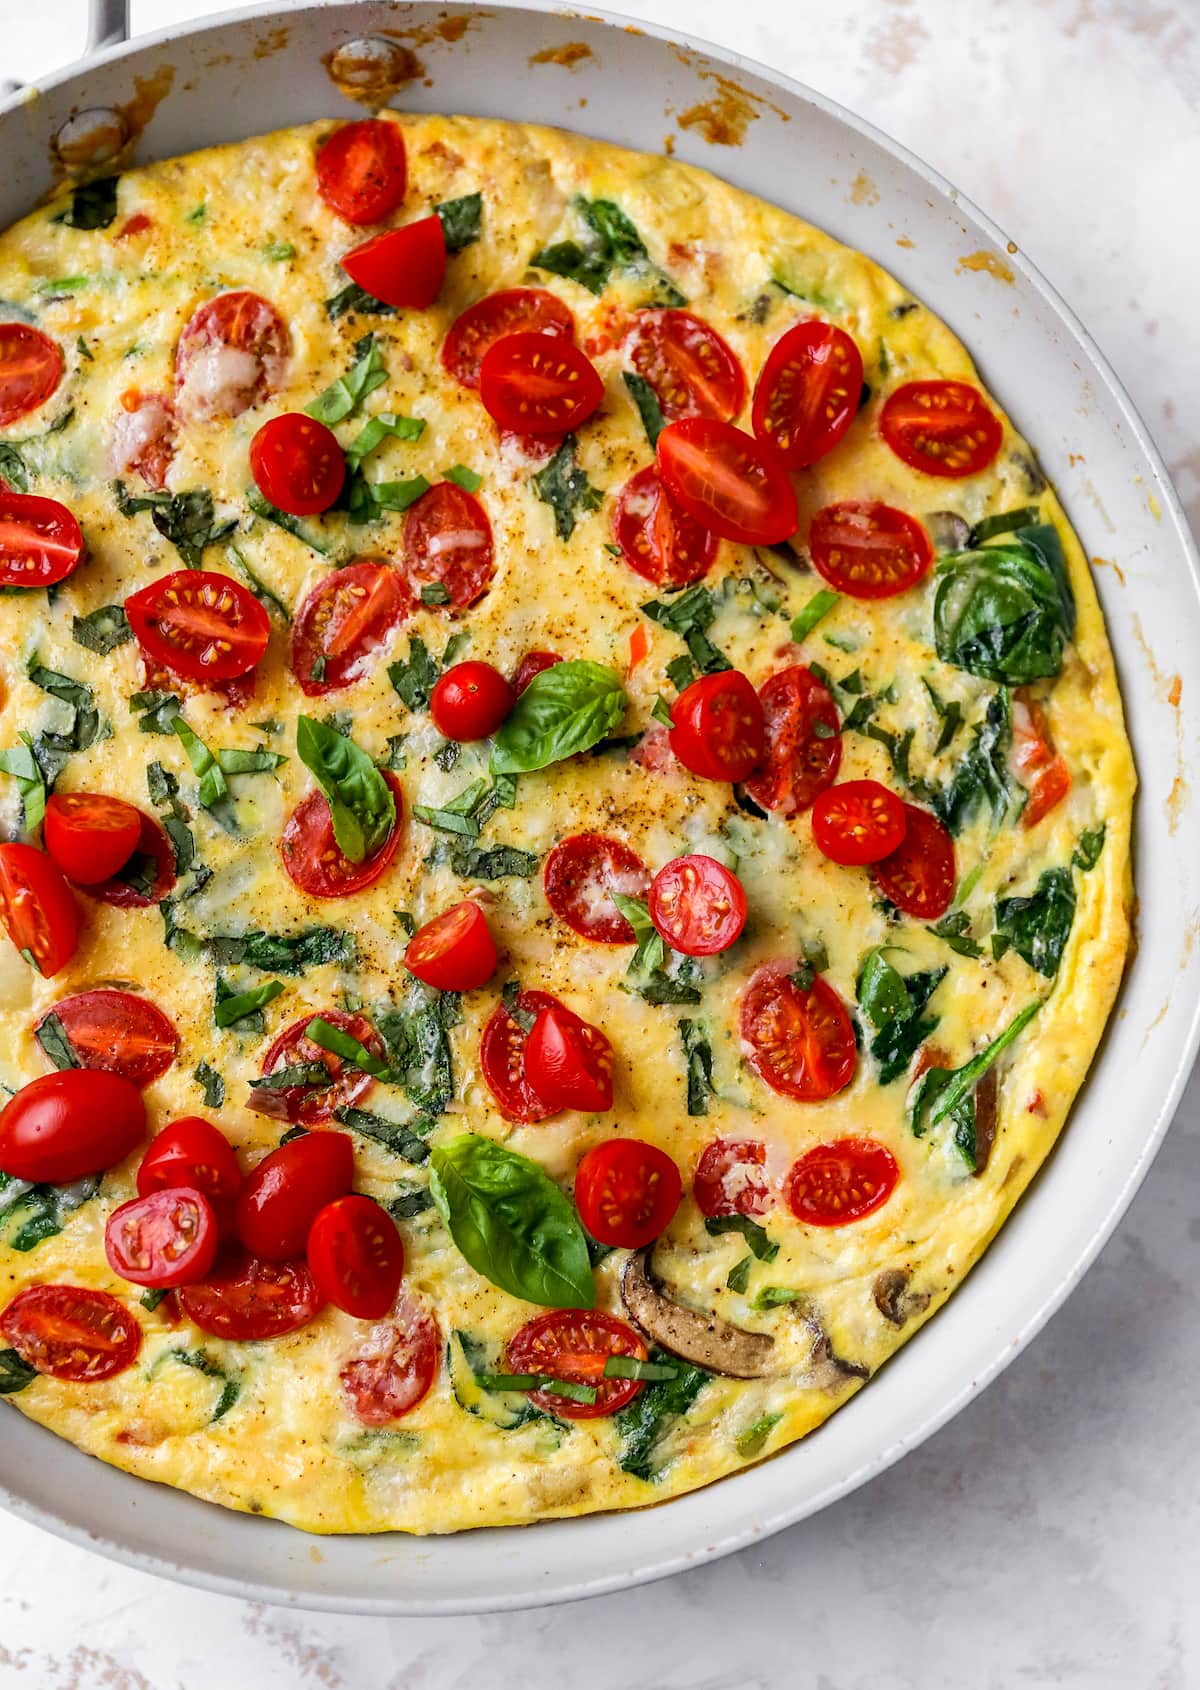 Frittata Recipe With Spinach, Bacon, and Cheddar